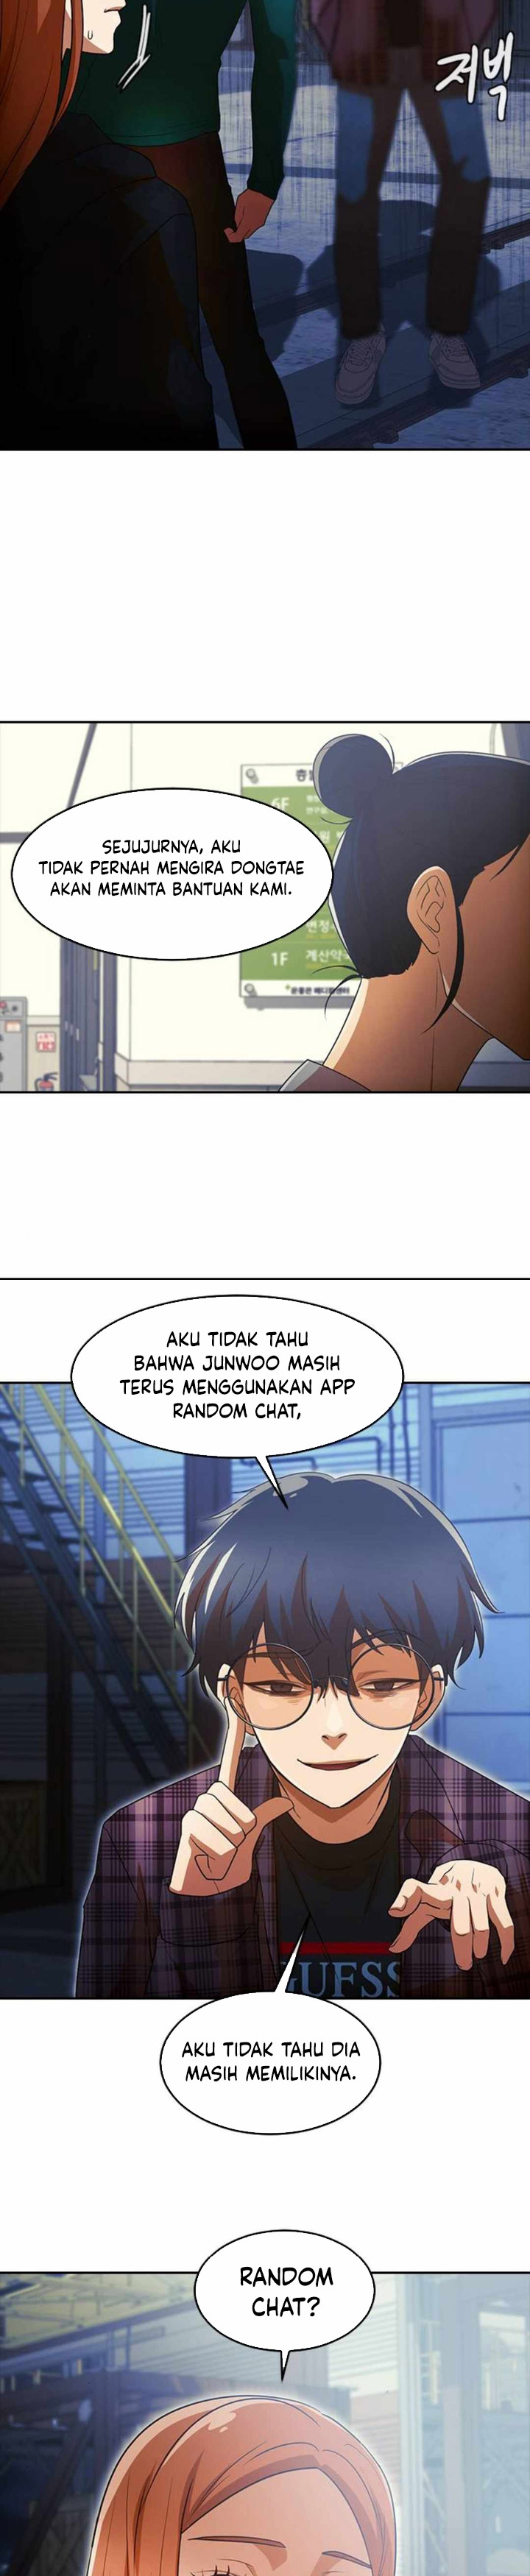 The Girl From Random Chatting! Chapter 314